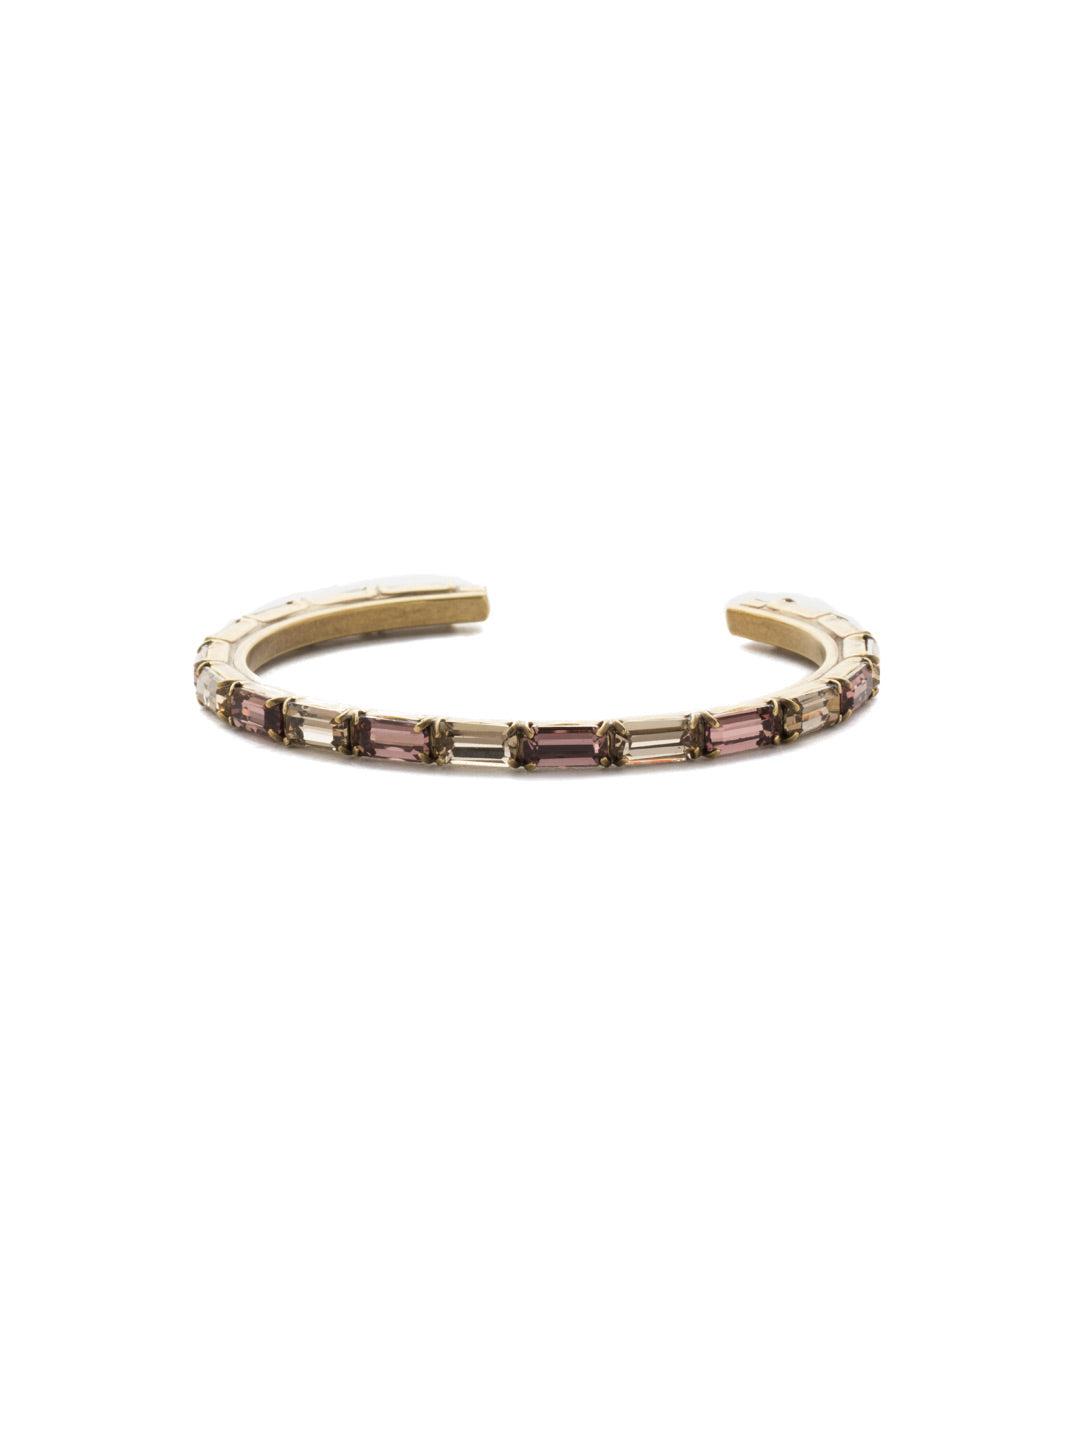 Brilliant Baguette Cuff Bracelet - BDK49AGMMA - This cuff bracelet features repeating crystal baguettes and can be mixed and matched in a myriad of ways. From Sorrelli's Mighty Maroon collection in our Antique Gold-tone finish.